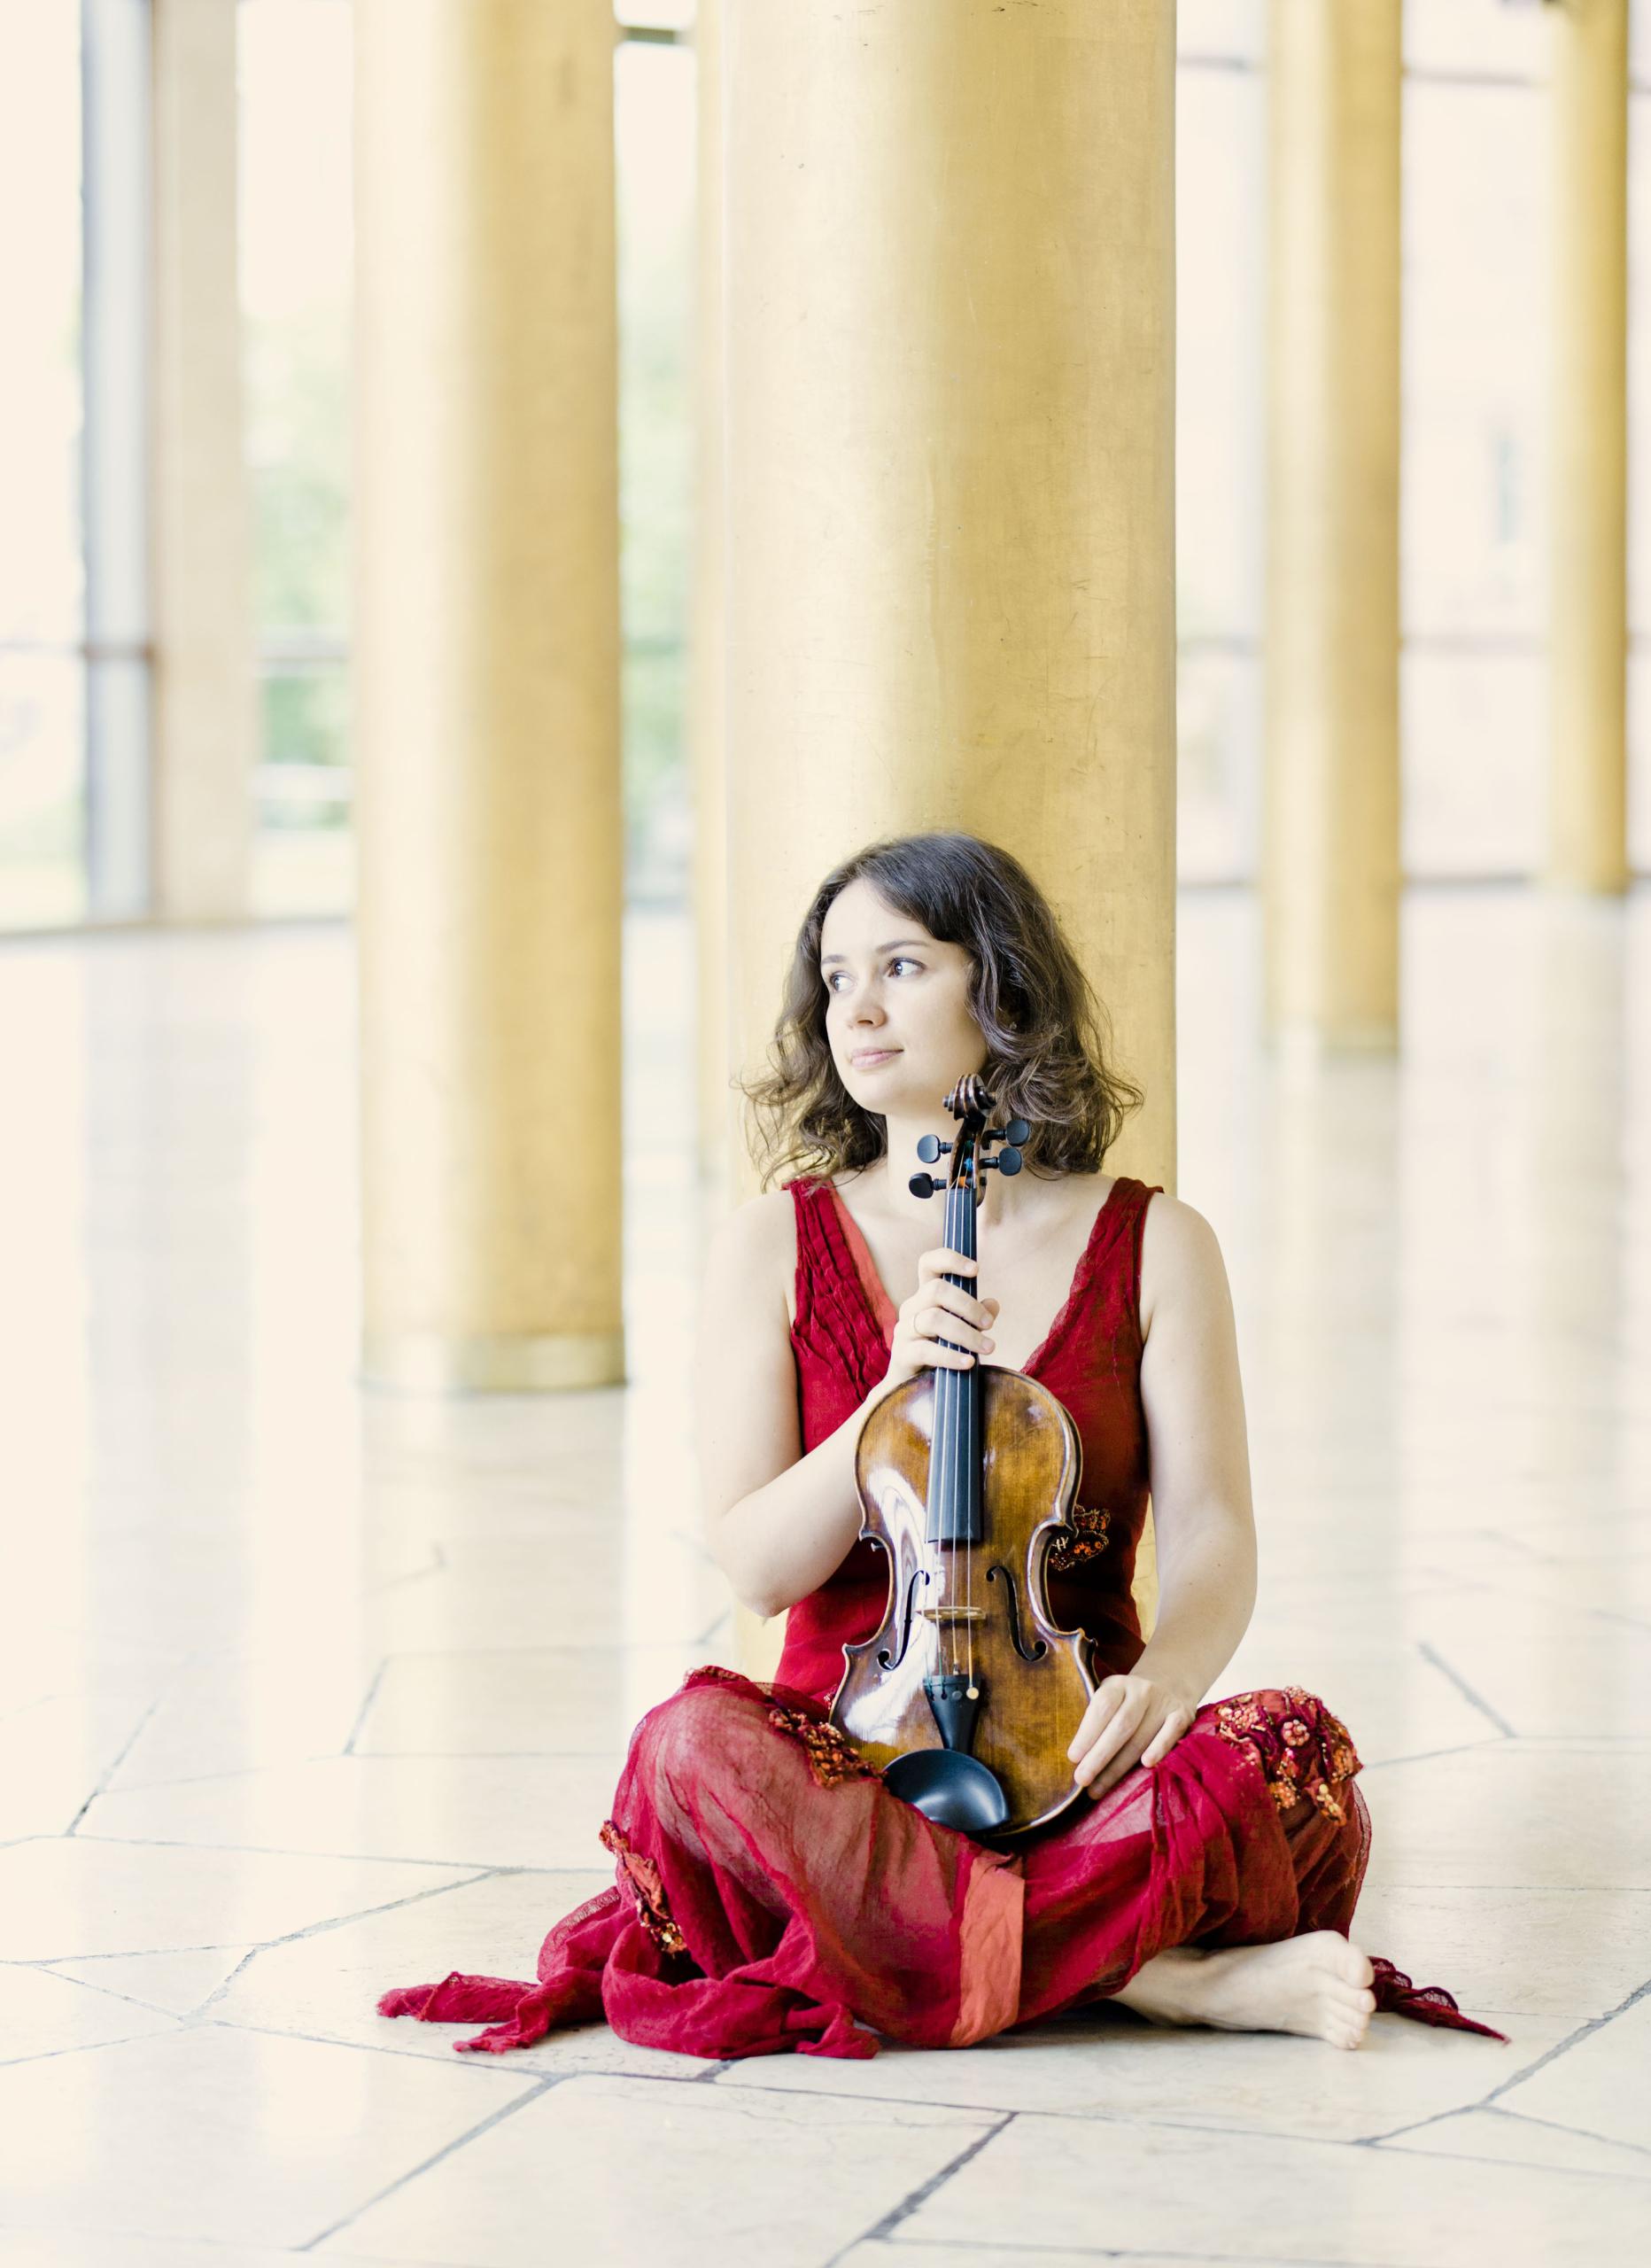 Violinist Patricia Kopachinskaya sits cross-legged on the floor and holds her violin on her lap